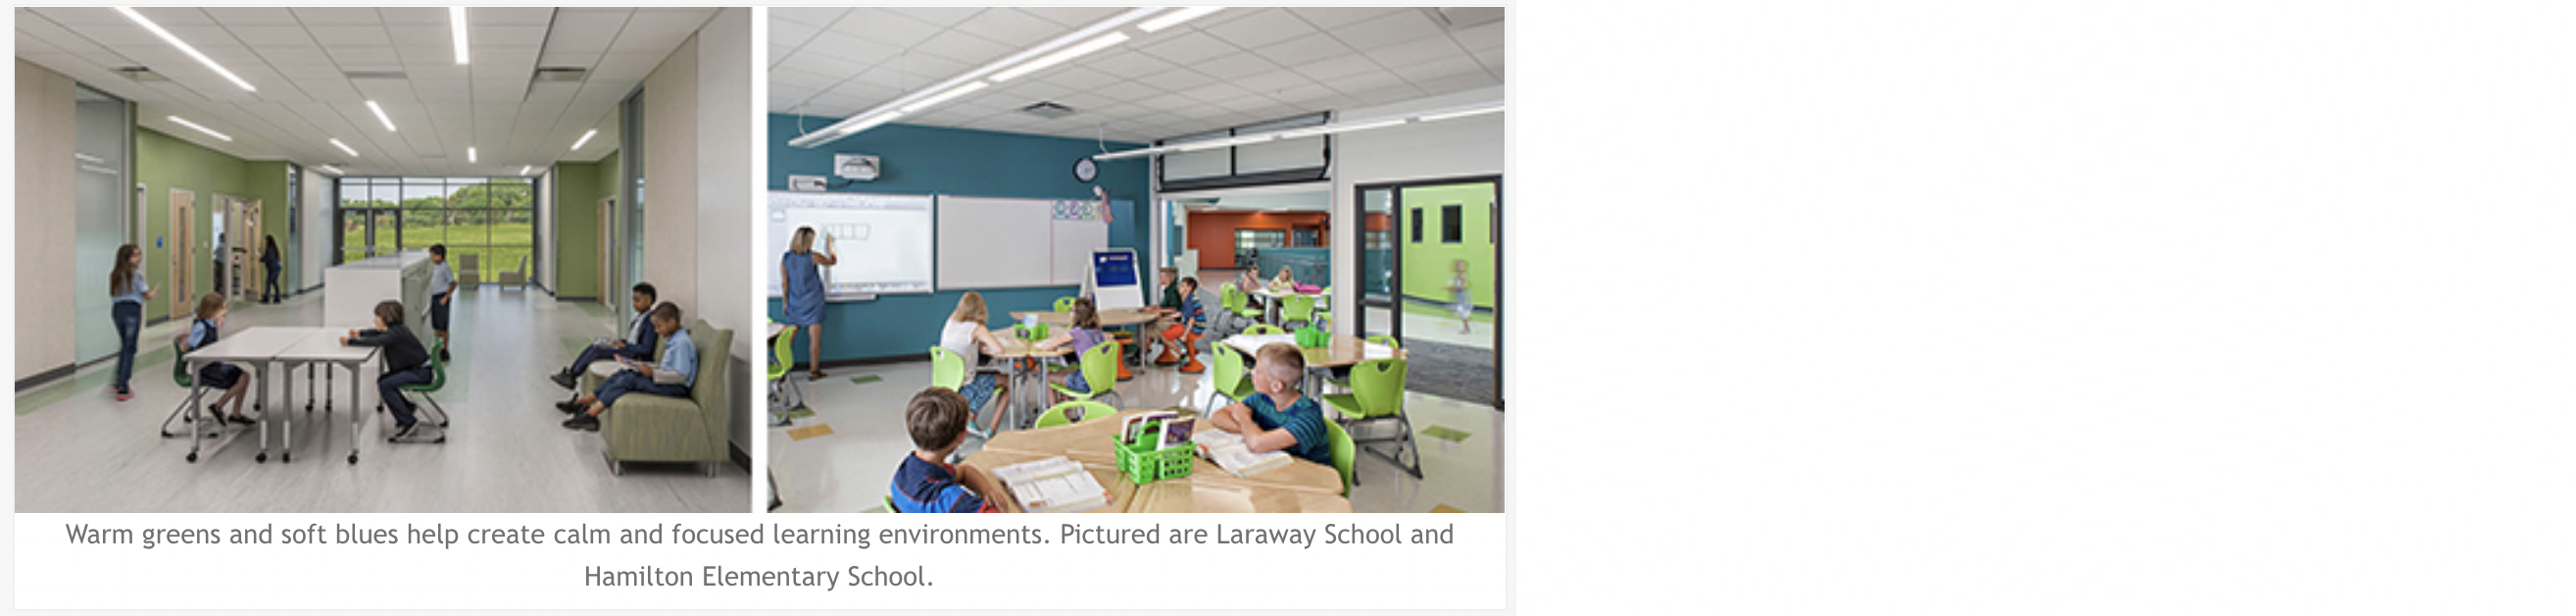 Warm greens and soft blues help create calm and focused learning environments. Pictured are Laraway School and Hamilton Elementary School.